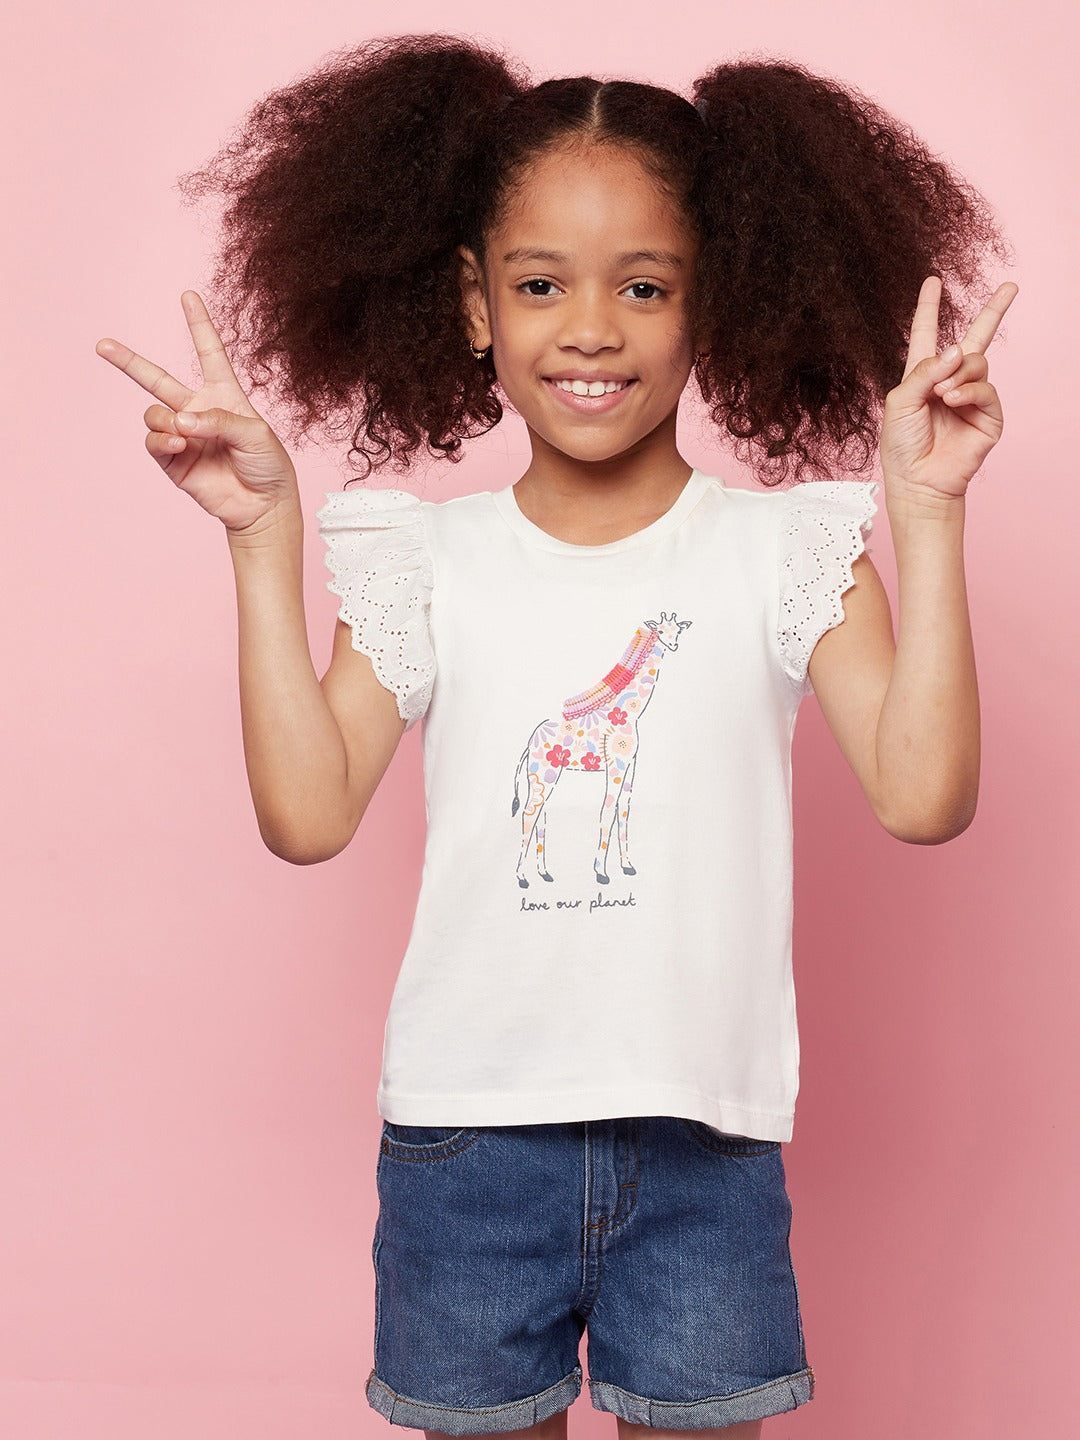 Kid Girls' White T-Shirt with Ruffle Sleeves and Pink Pants